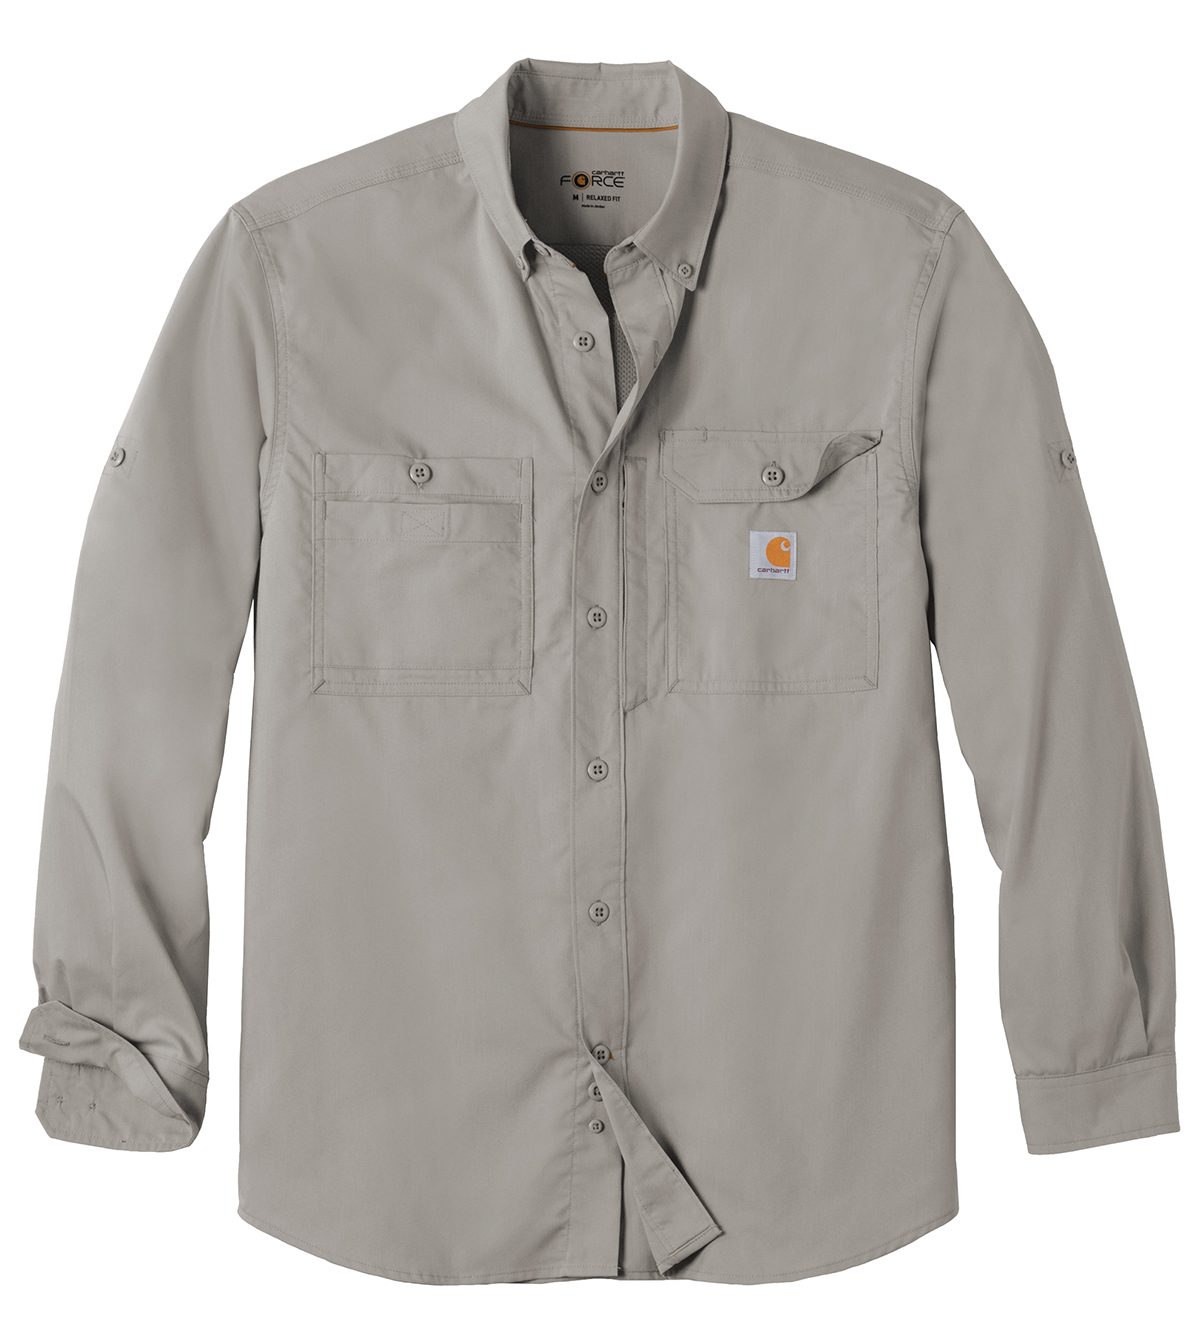 Carhartt Force Solid Long Sleeve Shirt, Product